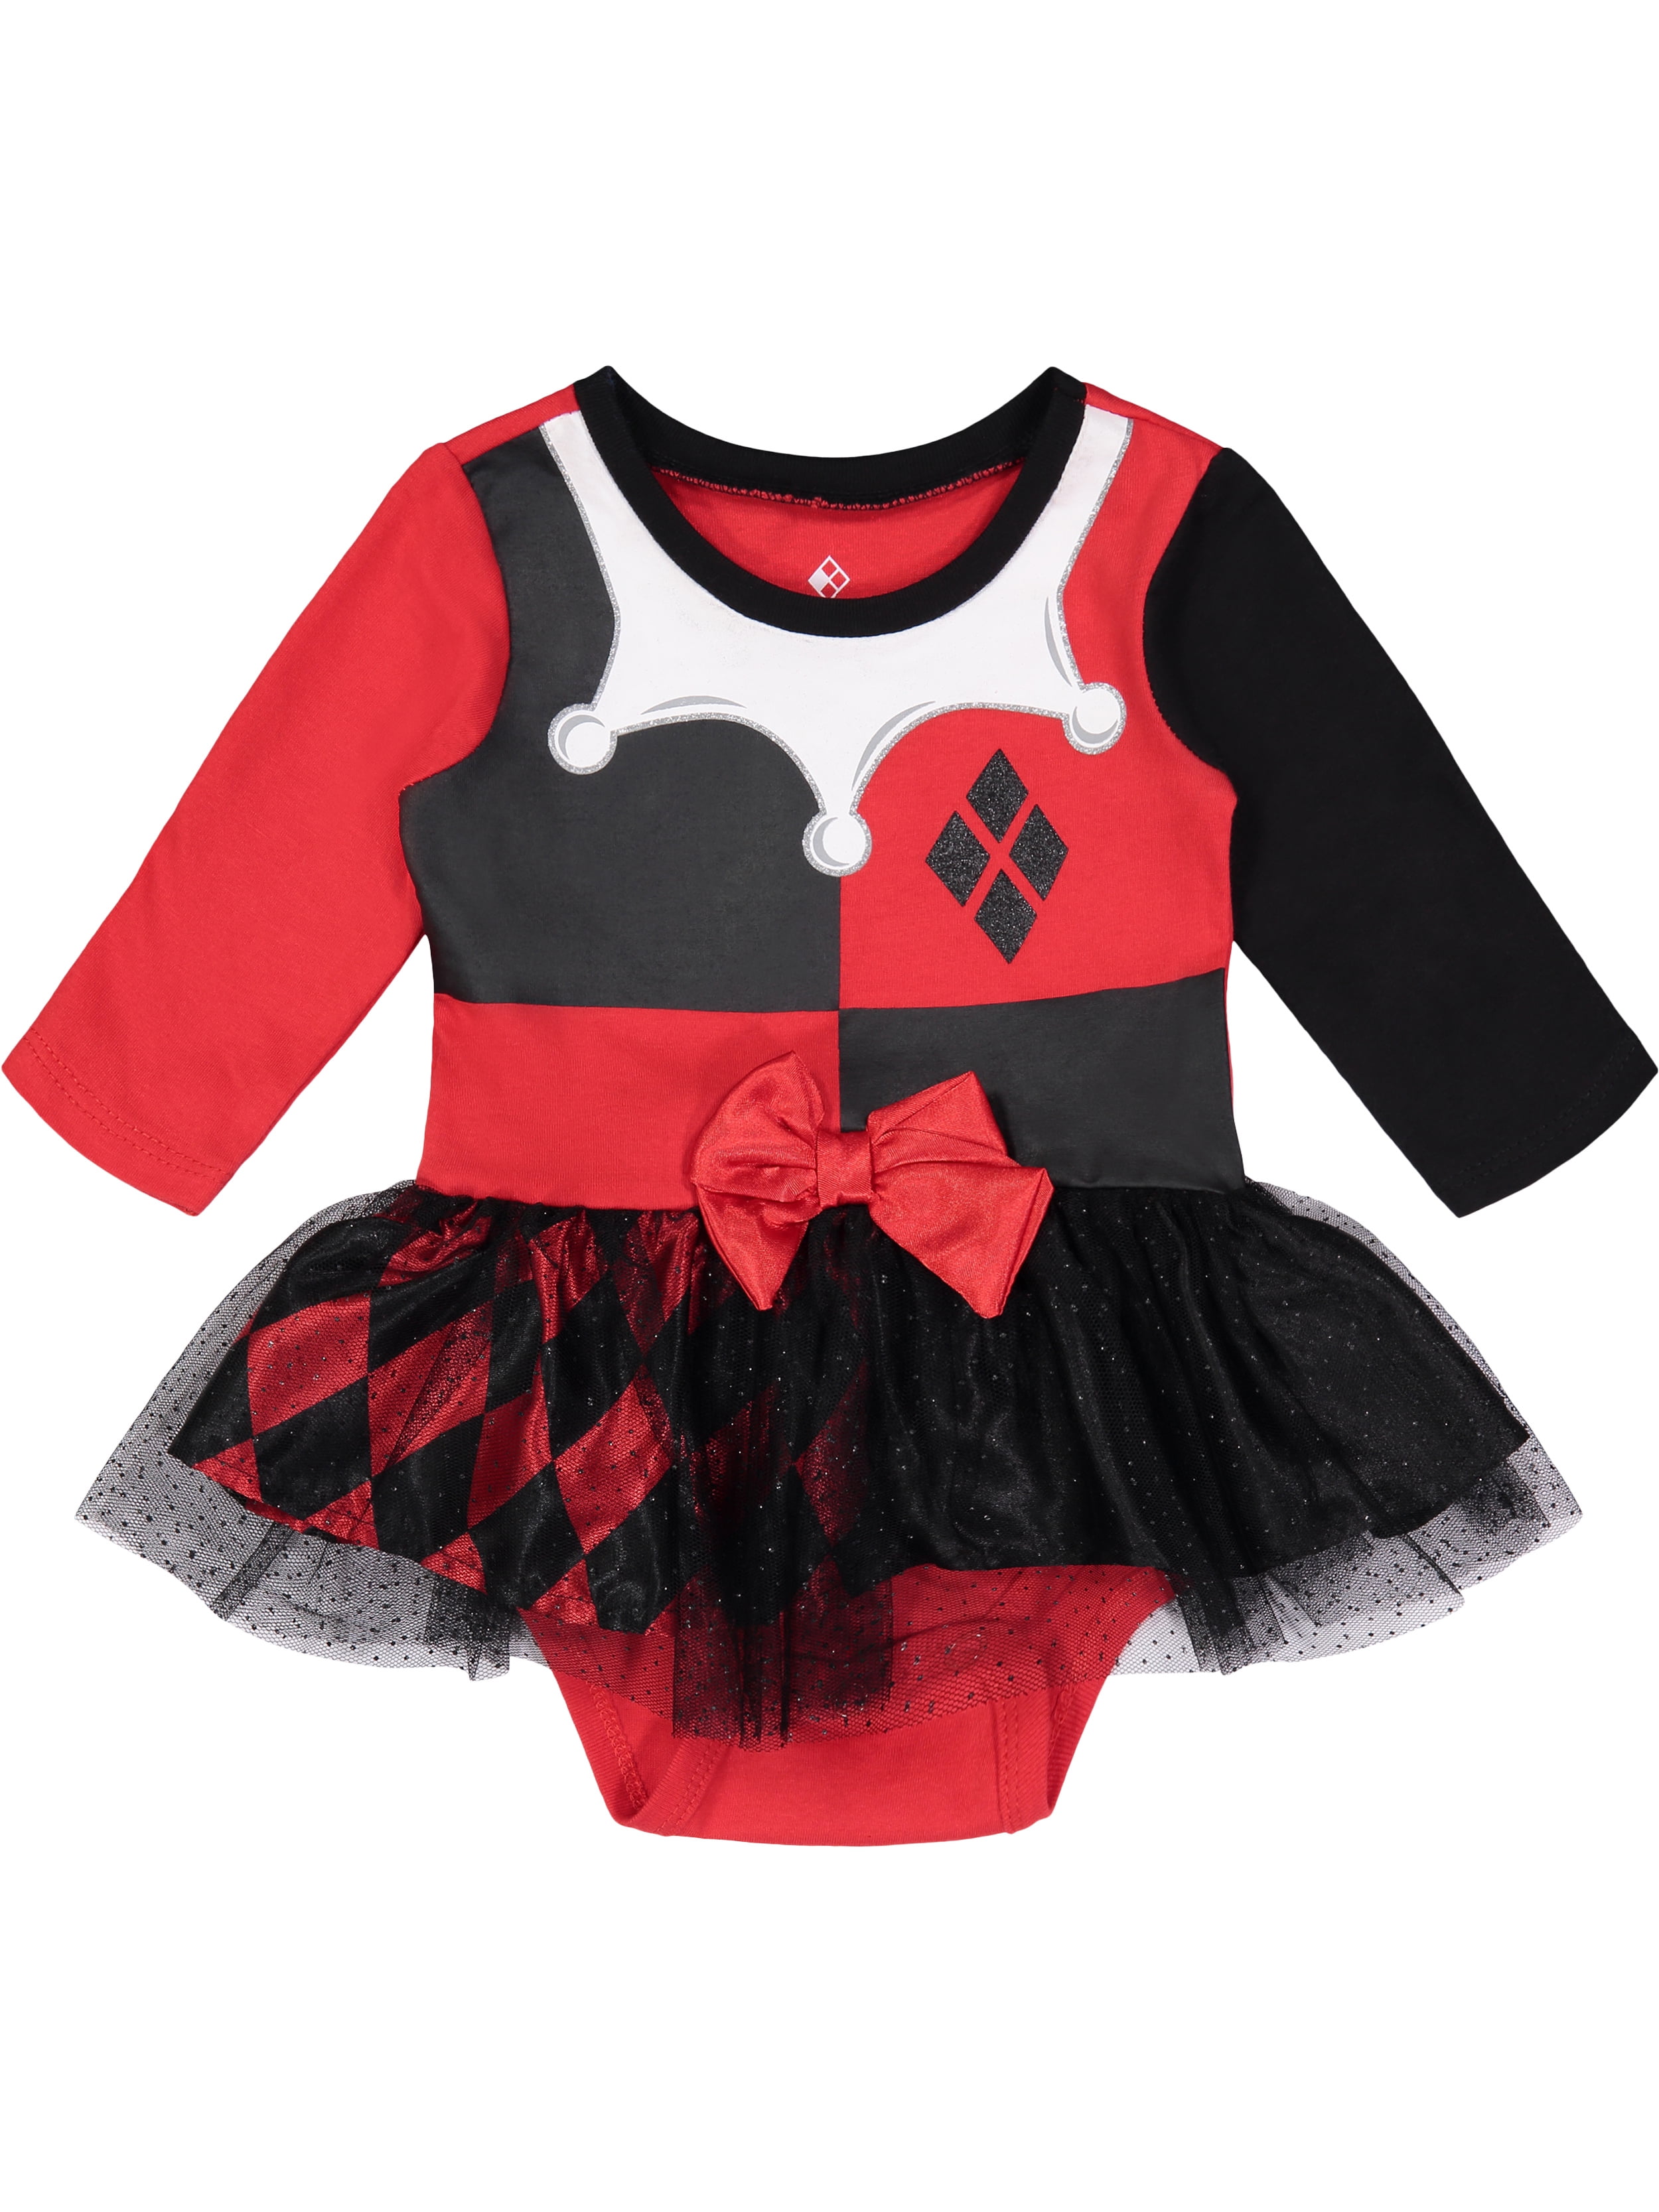 harley quinn baby clothes